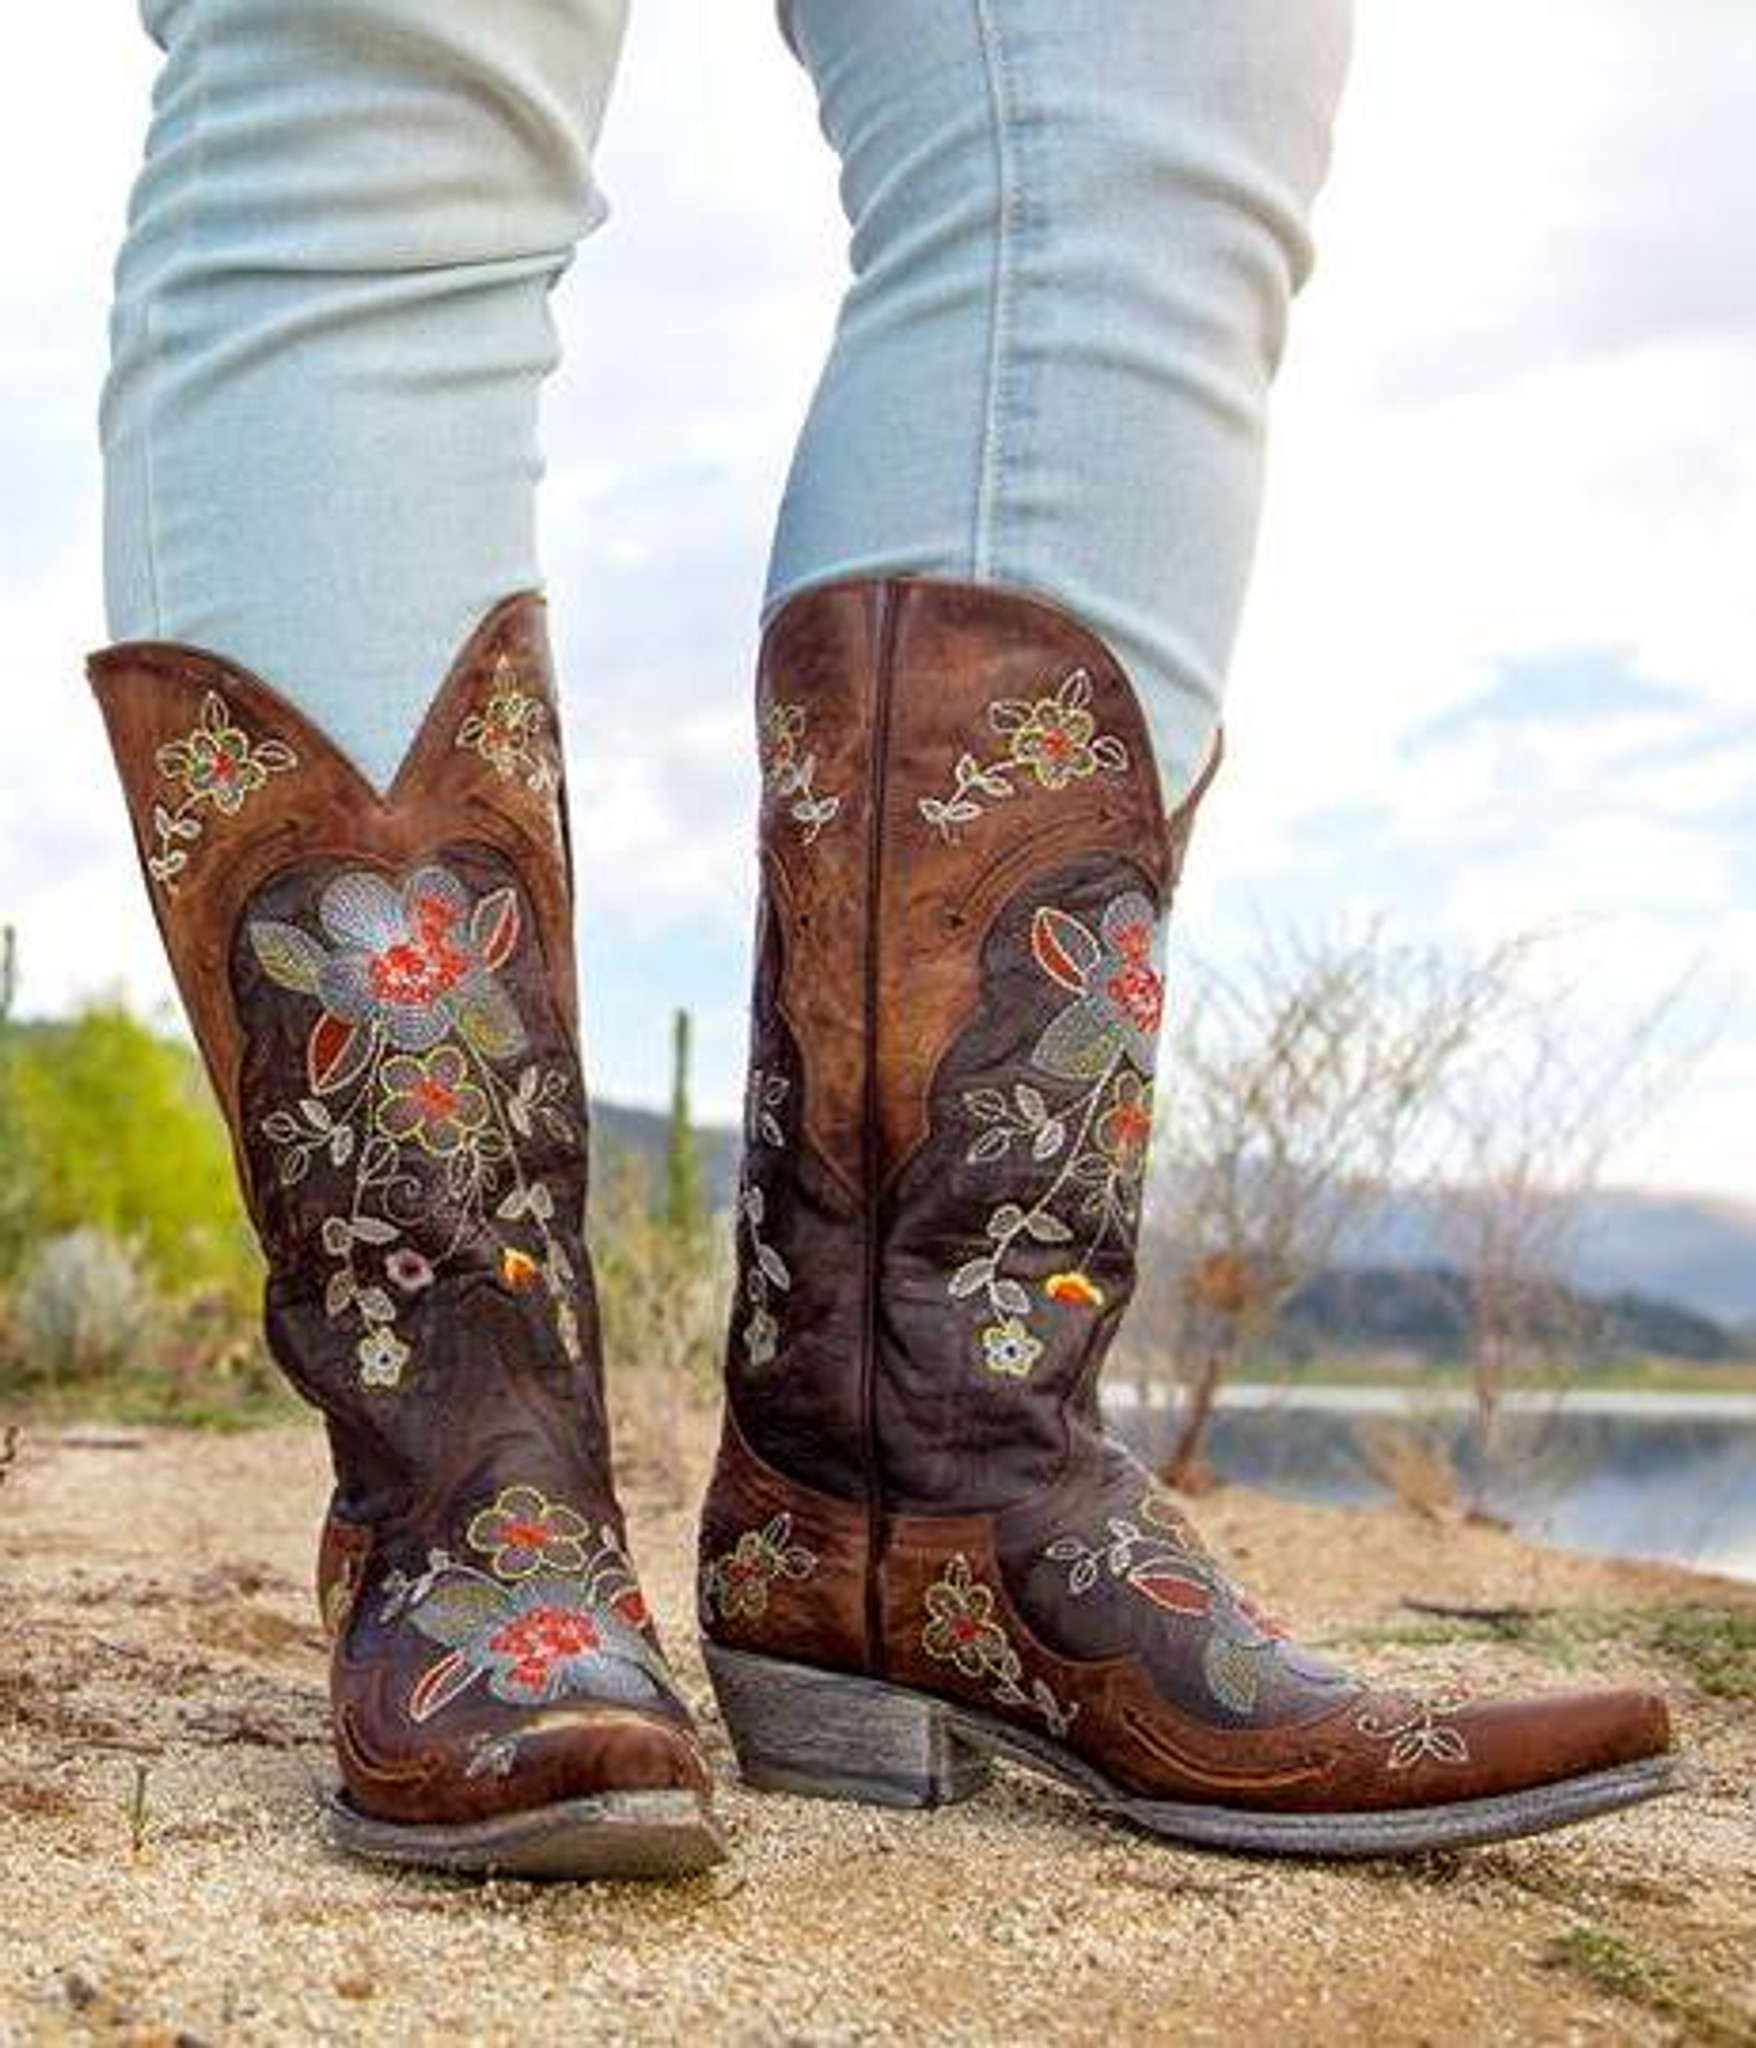 Old Gringo Bonnie Brass Relaxed Fit L649-1 Cowgirl Boots